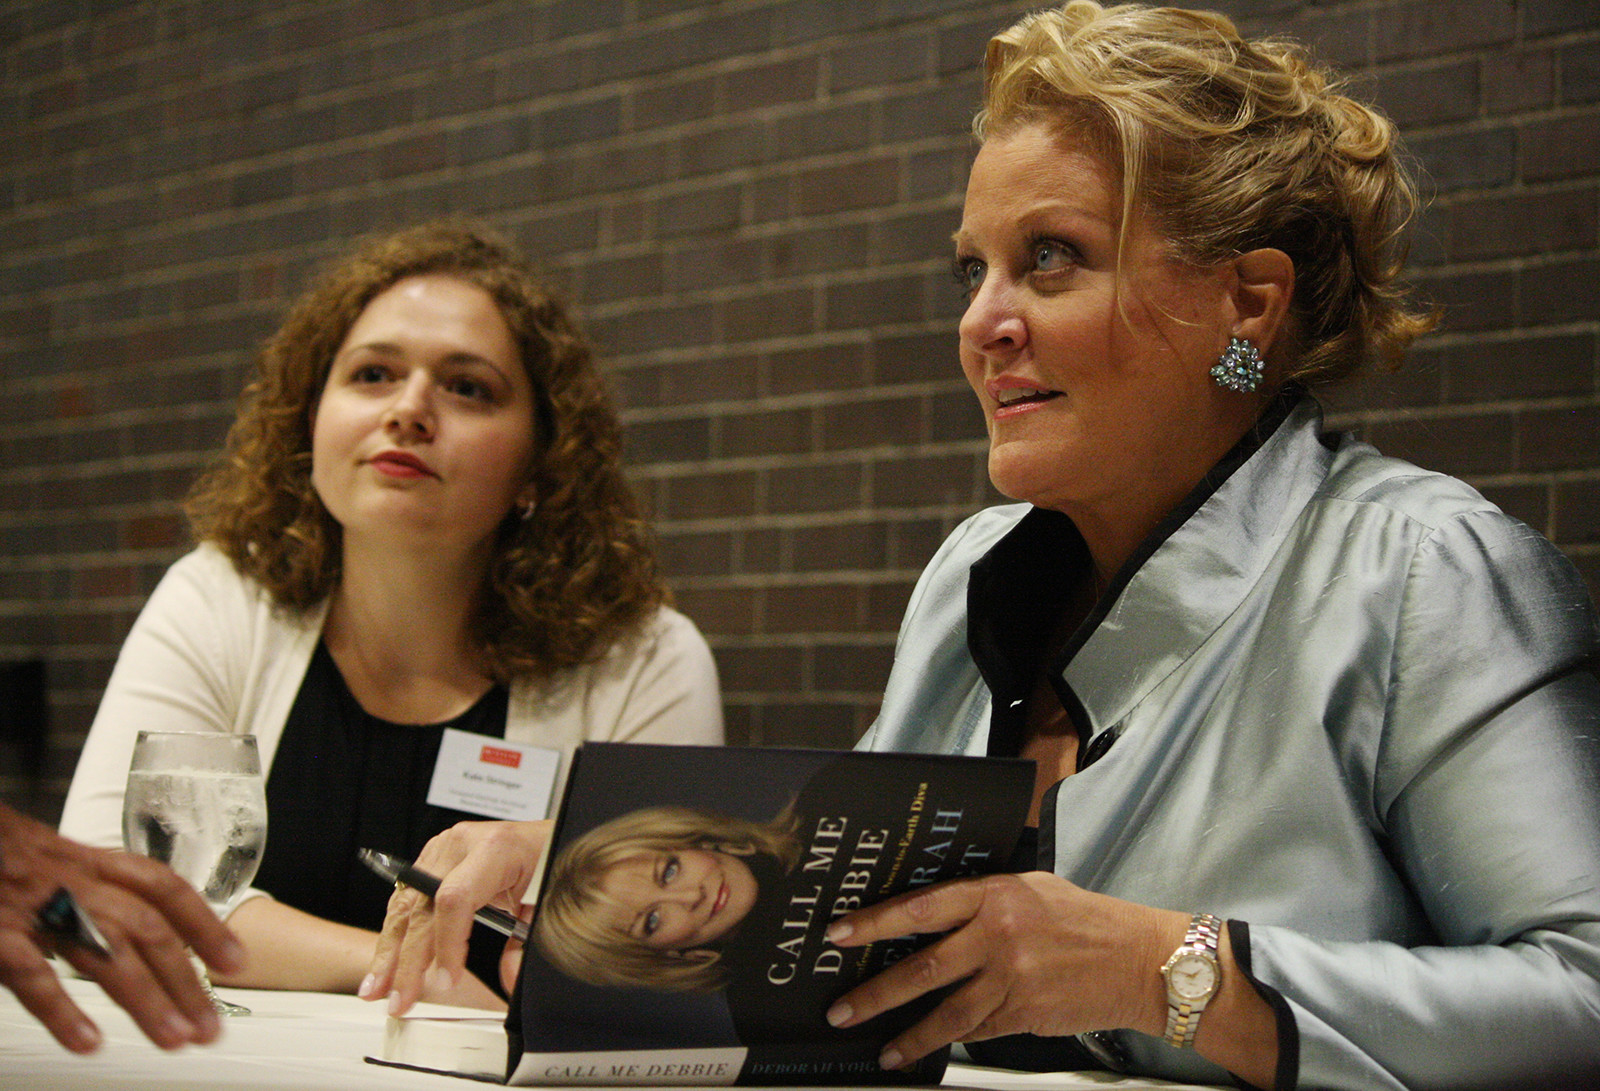 Soprano songstress Deborah Voigt signs a fan's copy of her new memoir, "Call Me Debbie: True Confessions of a Down-to-Earth Diva," following her talk at Metcalf Auditorium Tuesday night as part of the Howard Gotlieb Archival Research Center Friends Speaker Series. PHOTO BY ADRIANA DIAZ/DAILY FREE PRESS CONTRIBUTOR 